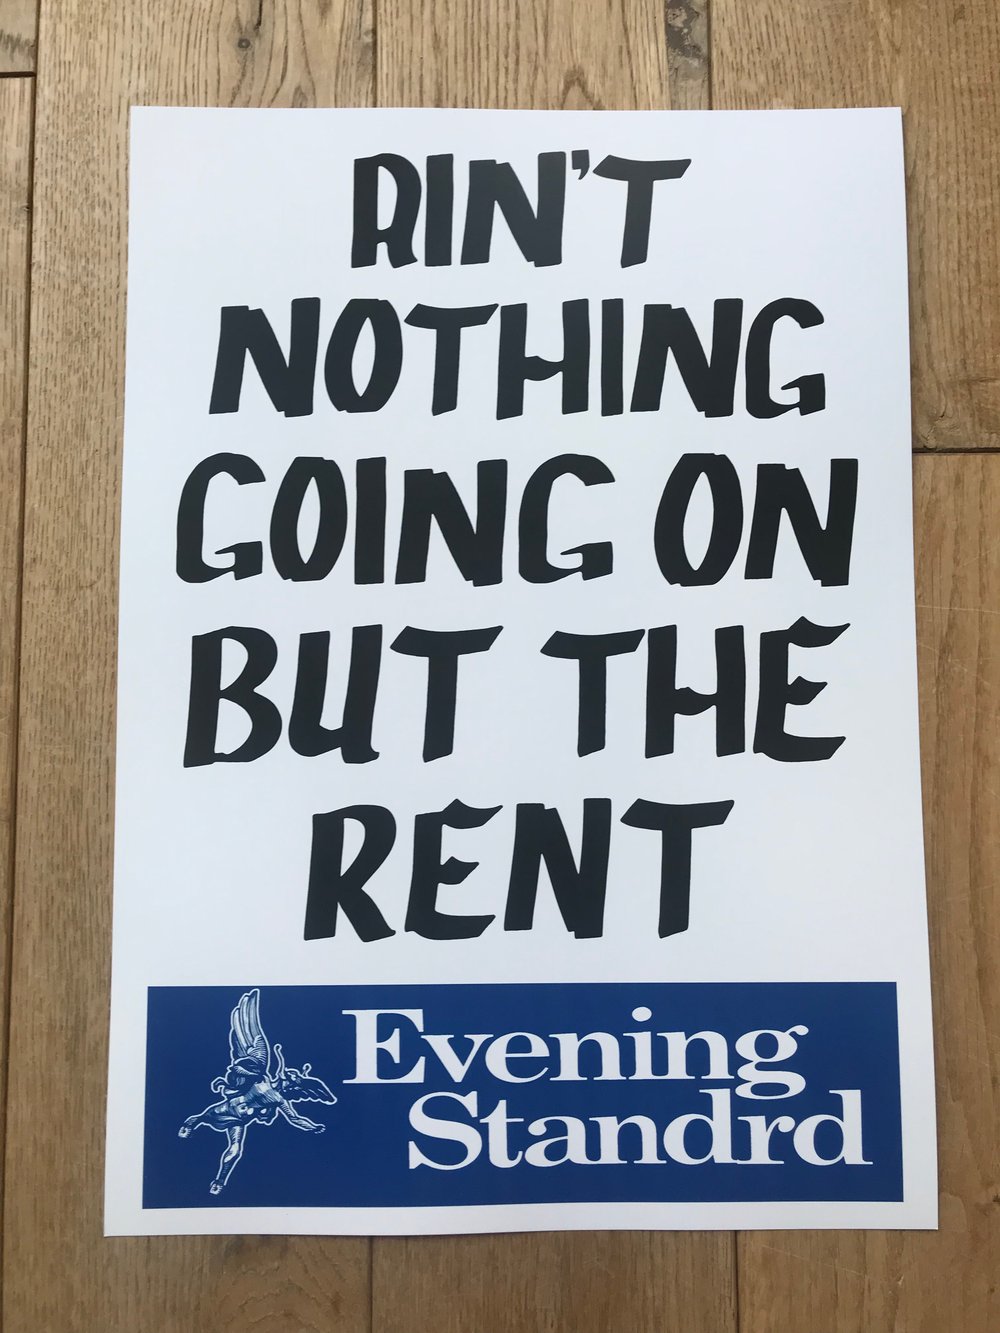 Image of AIN'T NOTHING GOING ON BUT THE RENT